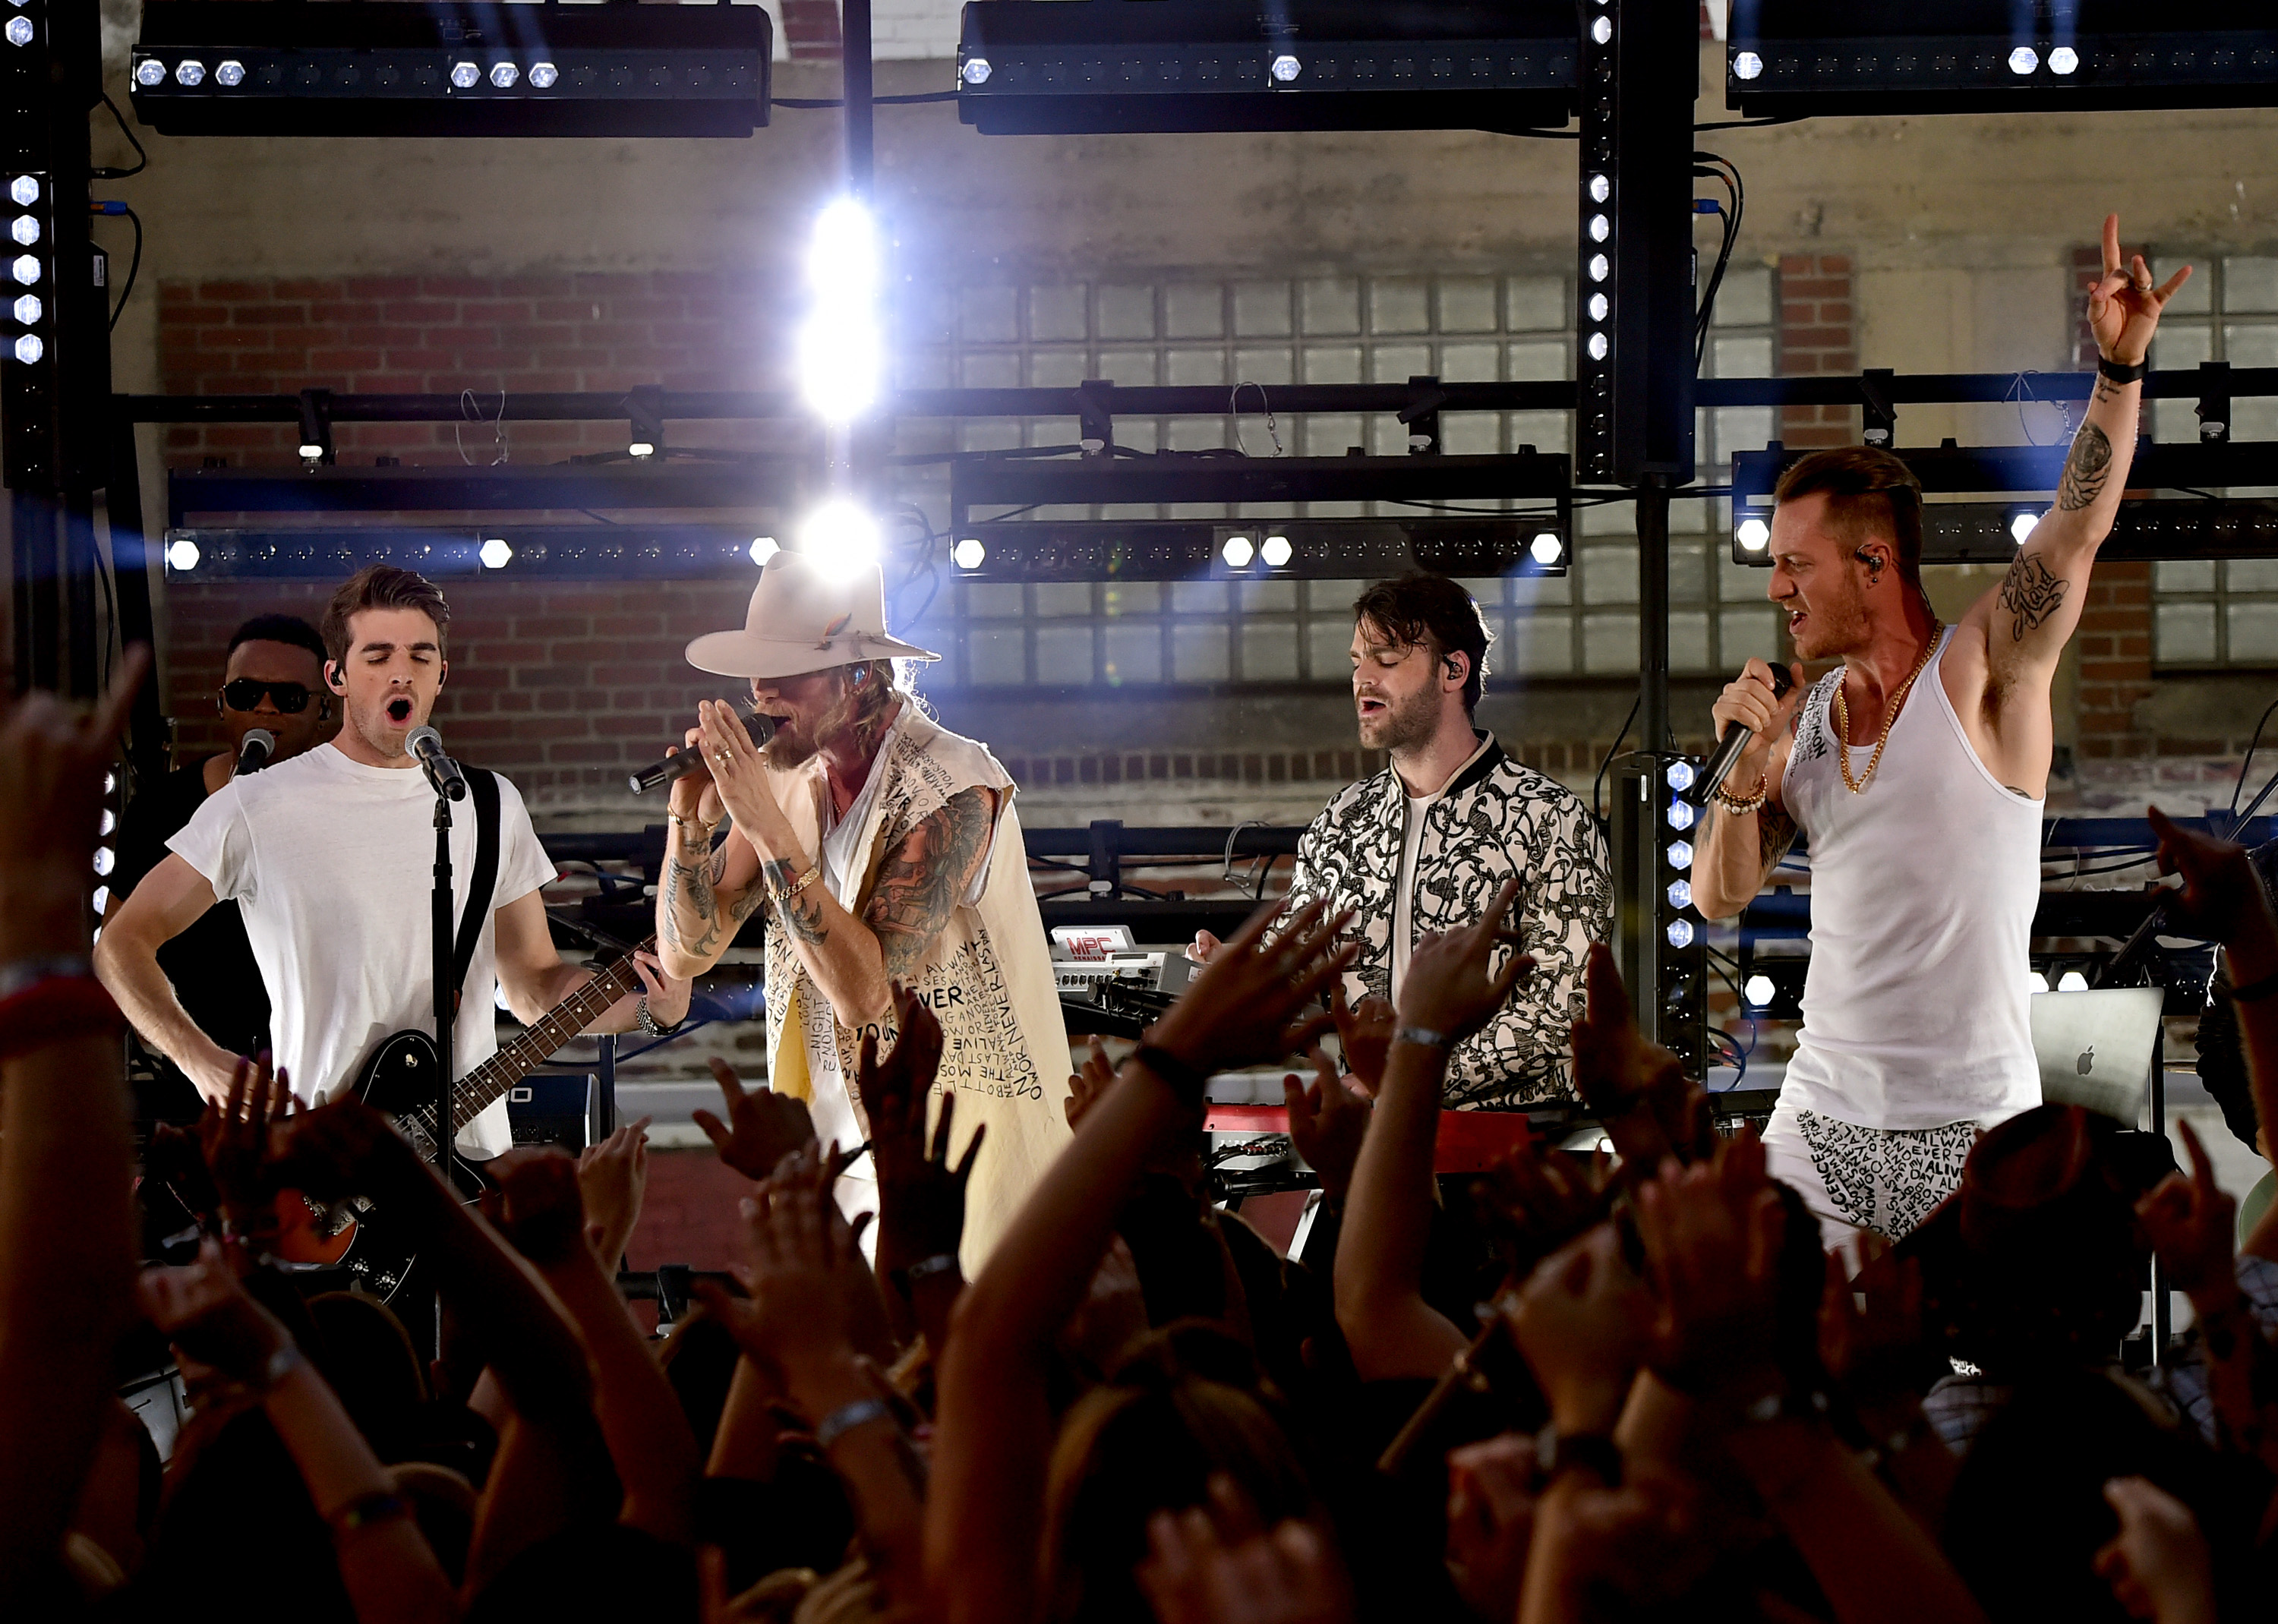 Ratings: CMT Music Awards Viewership Falls From Last Year